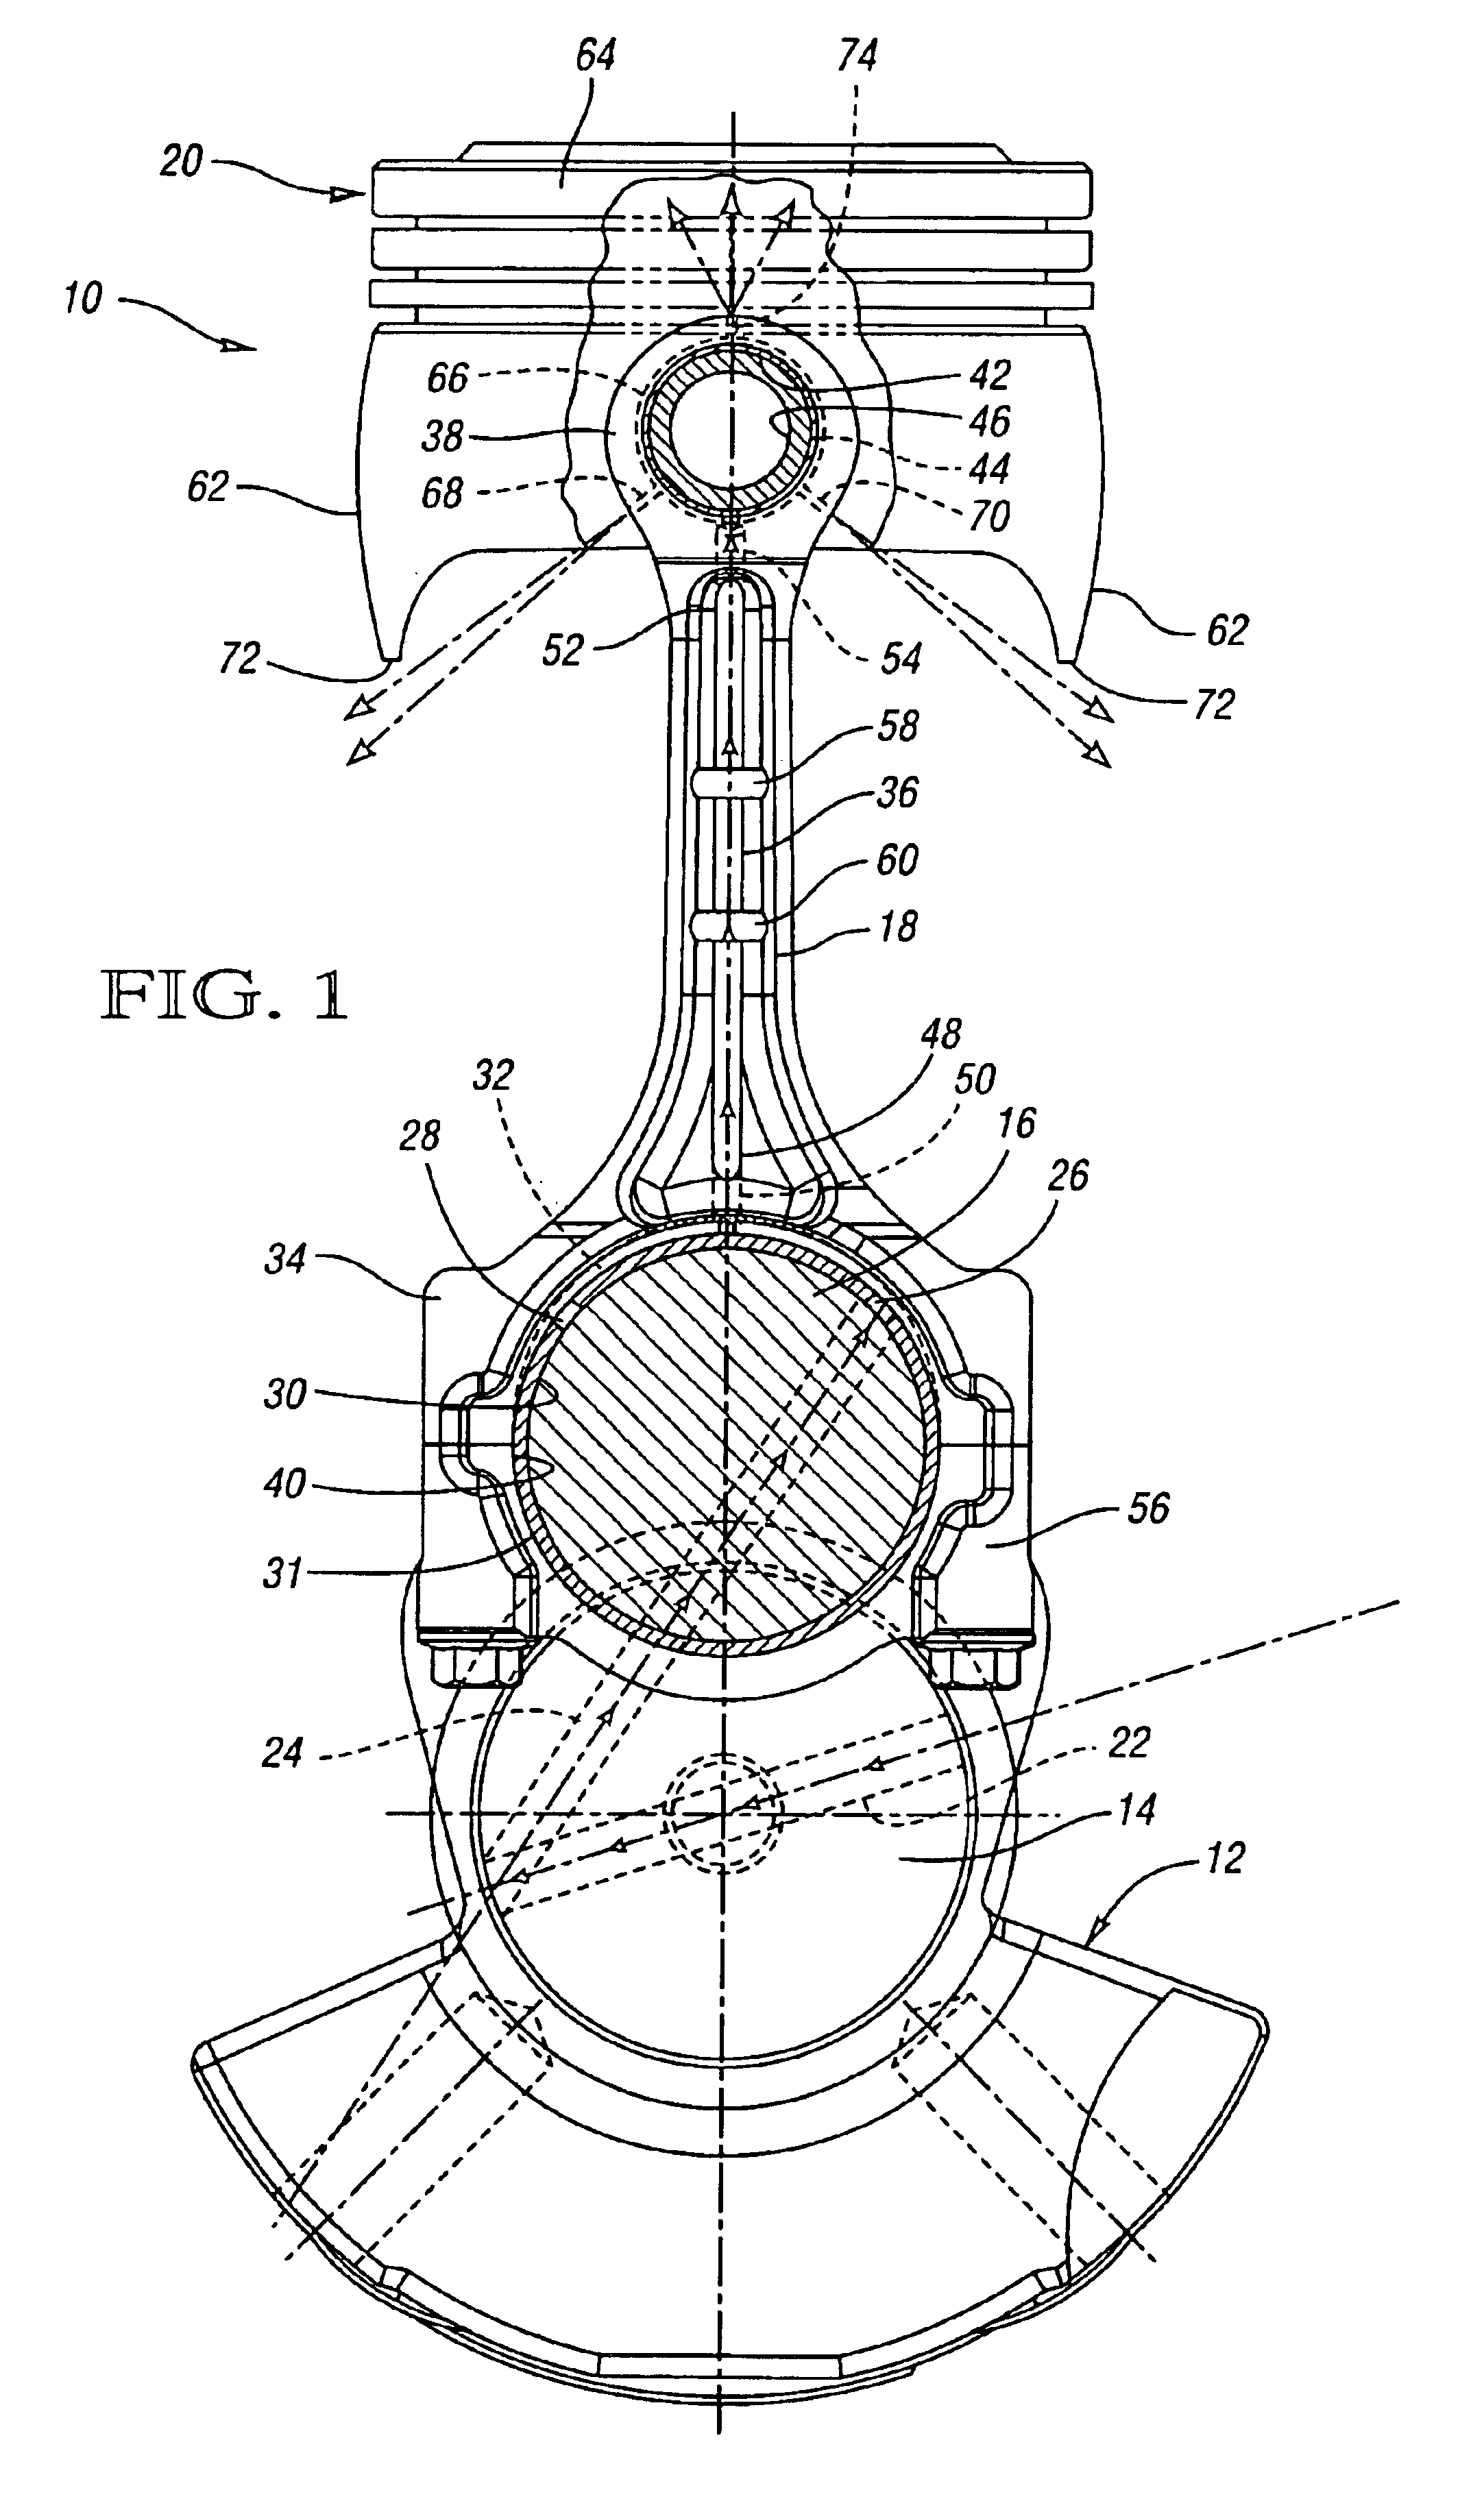 Connecting rod with lubricant tube